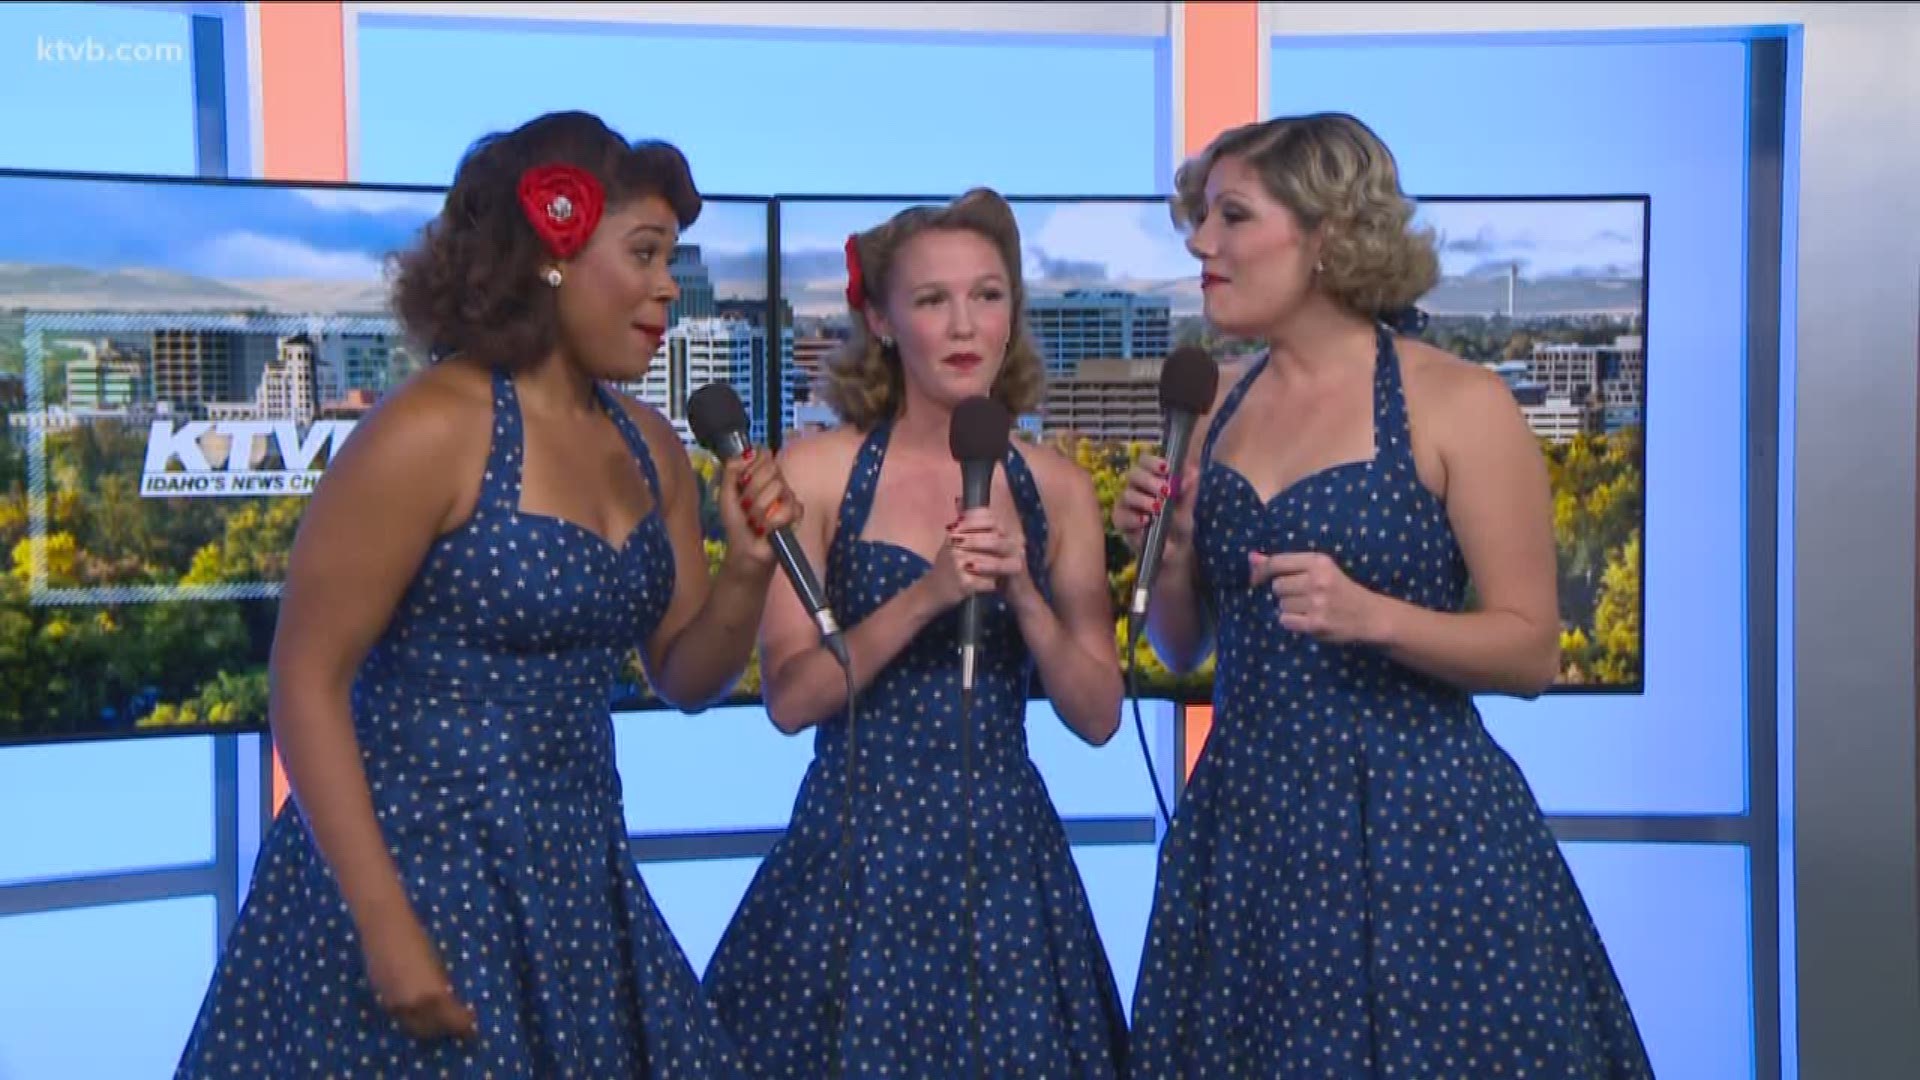 The vocal trio hails from New Orleans and performs classic songs from the 1940s. They talked about coming to Idaho on News at Noon and performed a song.